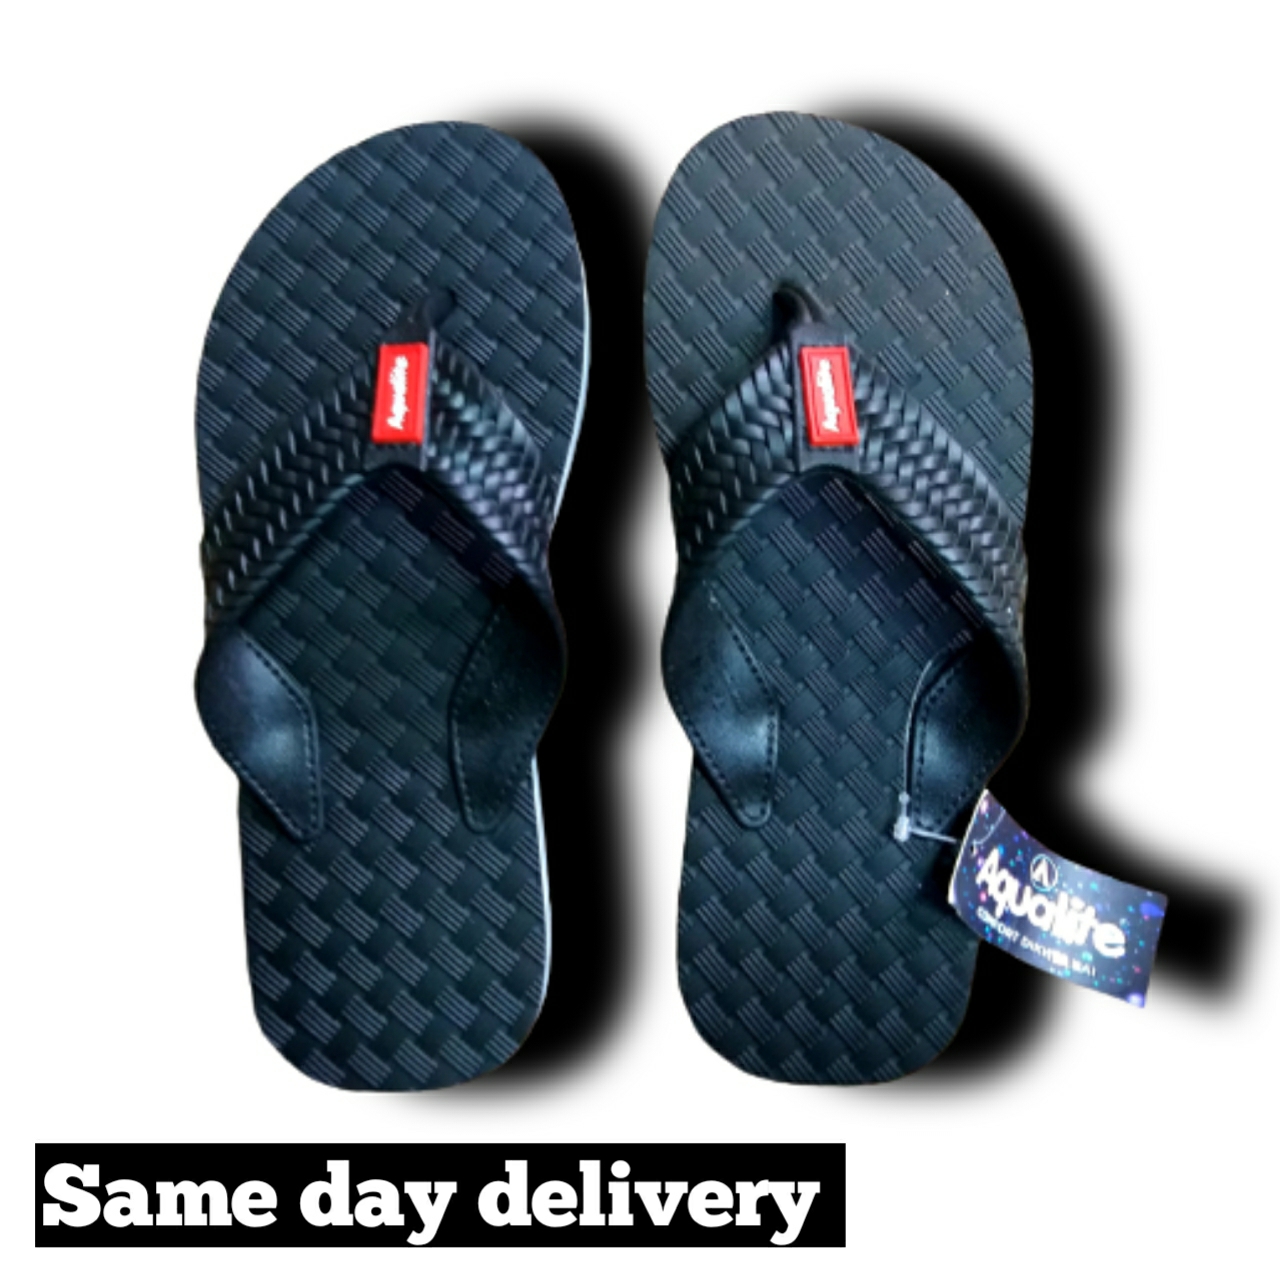 Buy Aqualite Comfortable Slippers for Men at Amazon.in-sgquangbinhtourist.com.vn